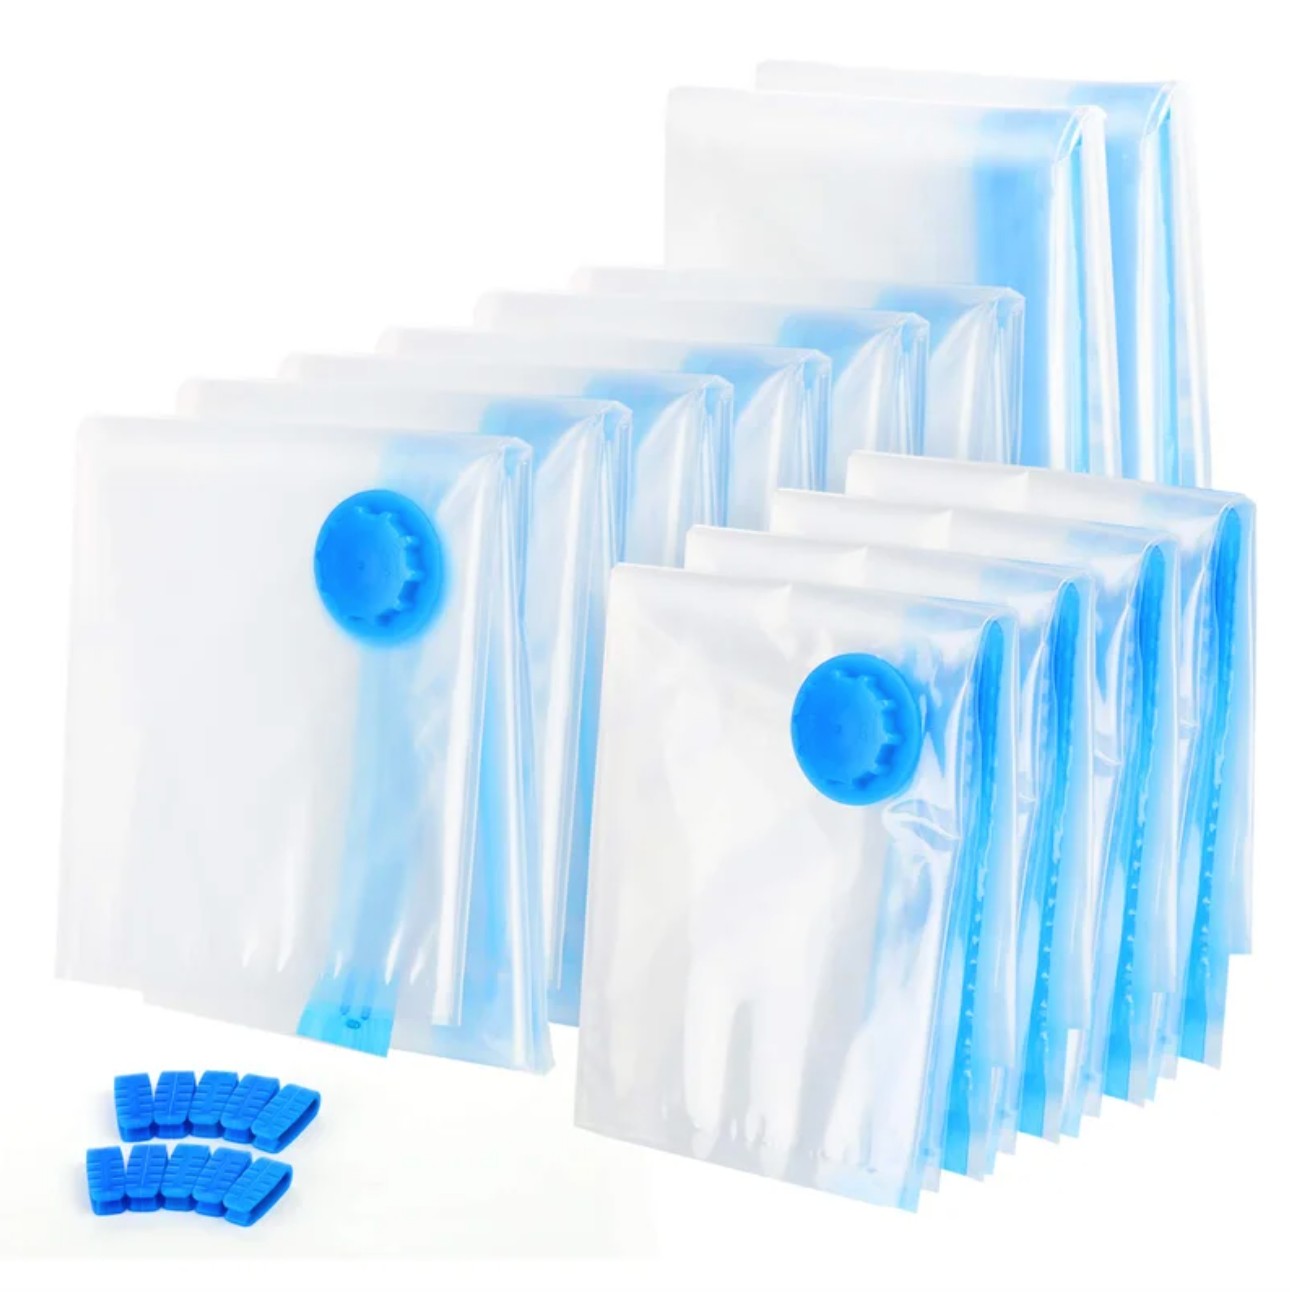 ns.productsocialmetatags:resources.openGraphTitle  Vacuum storage bags, Vacuum  storage, Bag storage